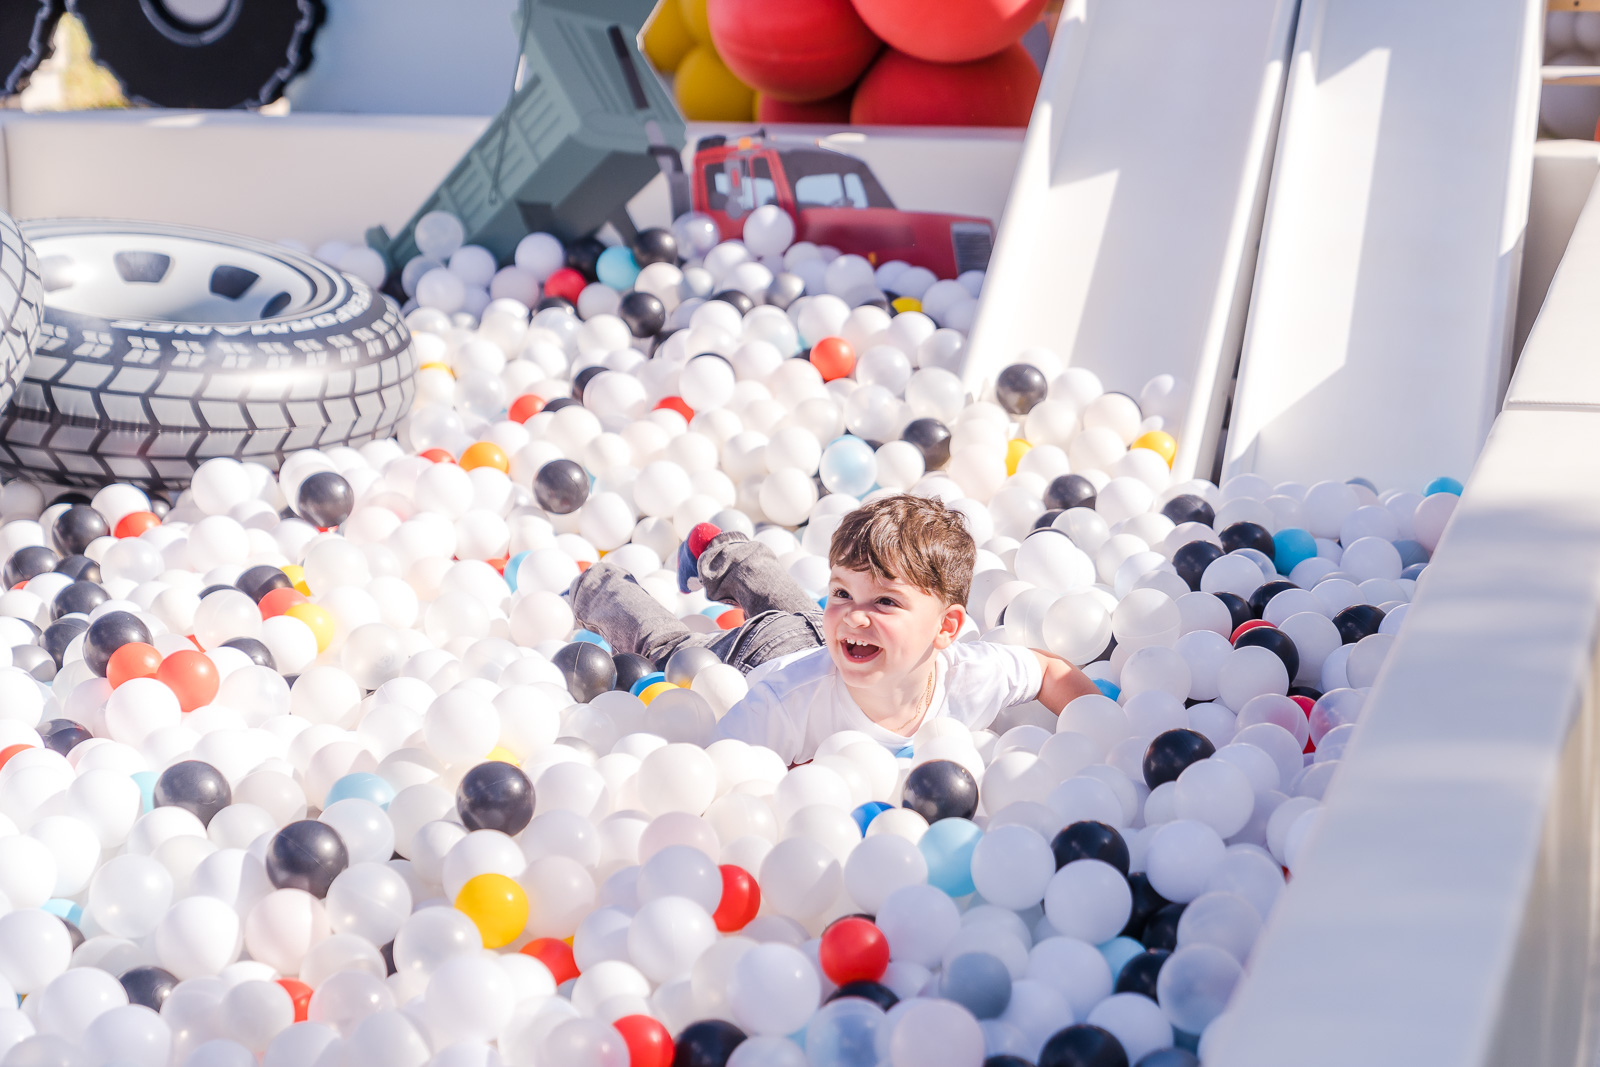 Orlando event photographer captures luxury truck themed birthday party with custom ball pit